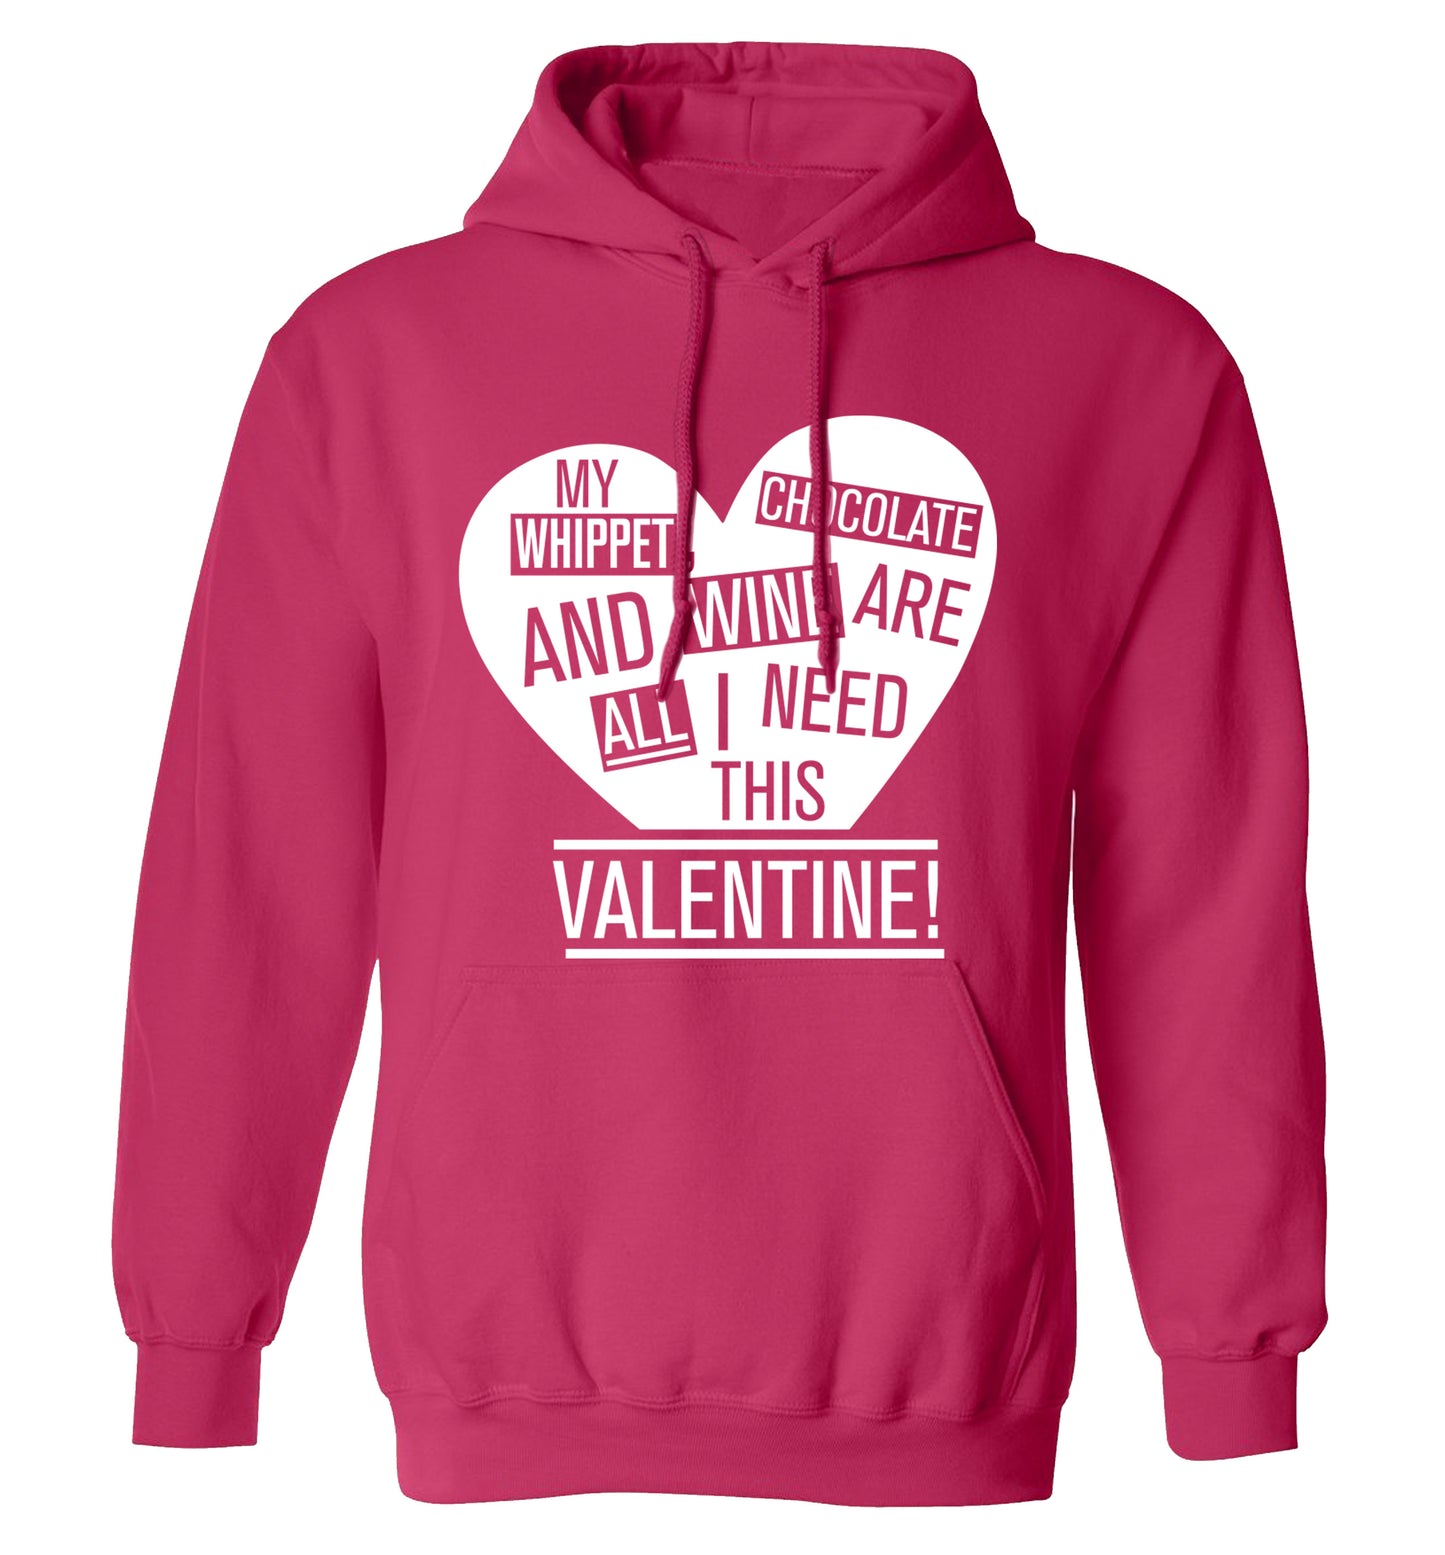 My whippet, chocolate and wine are all I need this valentine! adults unisex pink hoodie 2XL